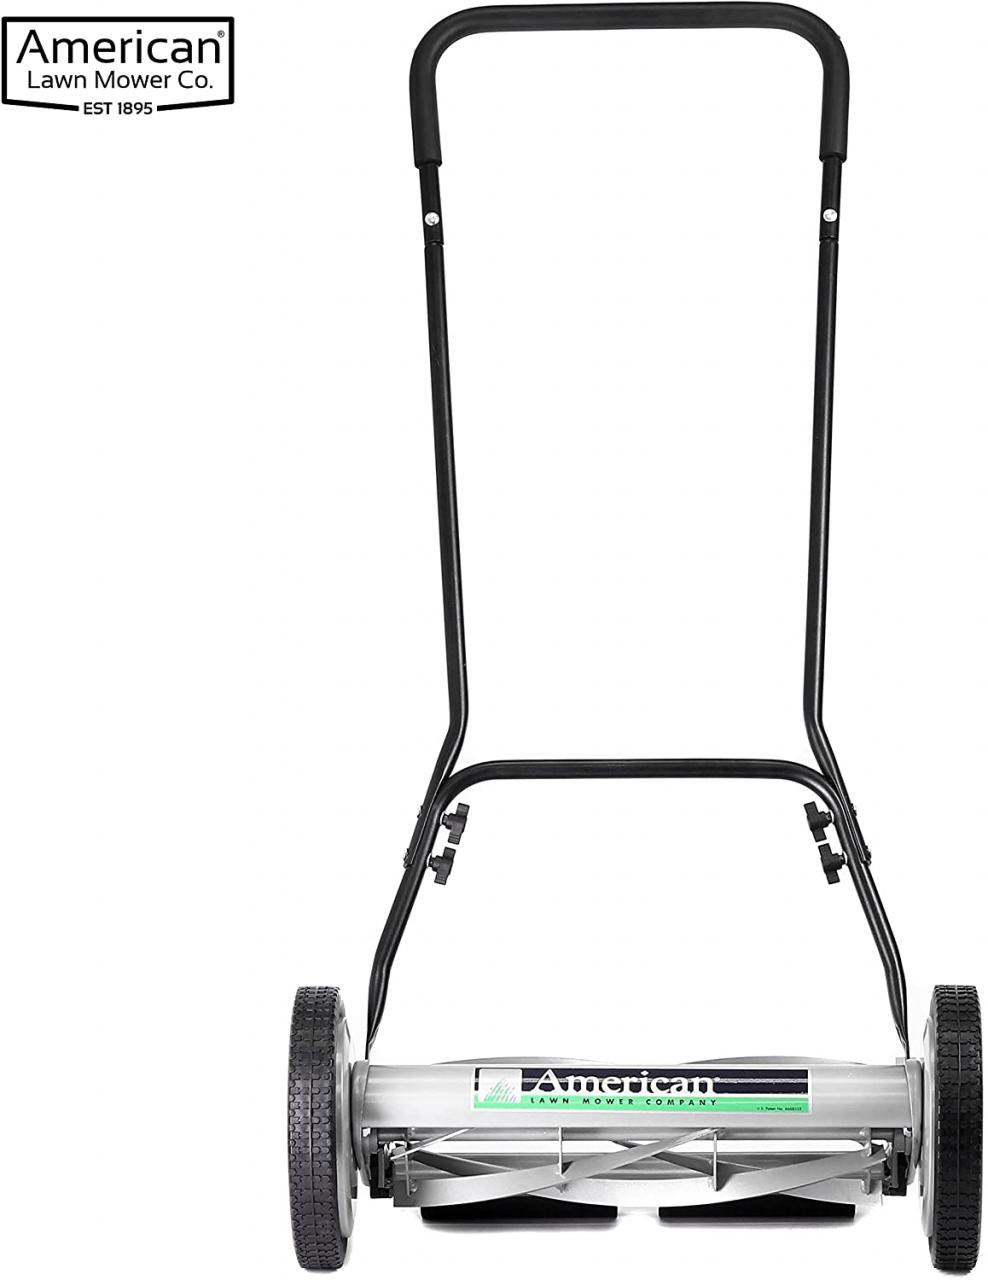 American Lawn Mower Company 50514 Review - Should you get one?